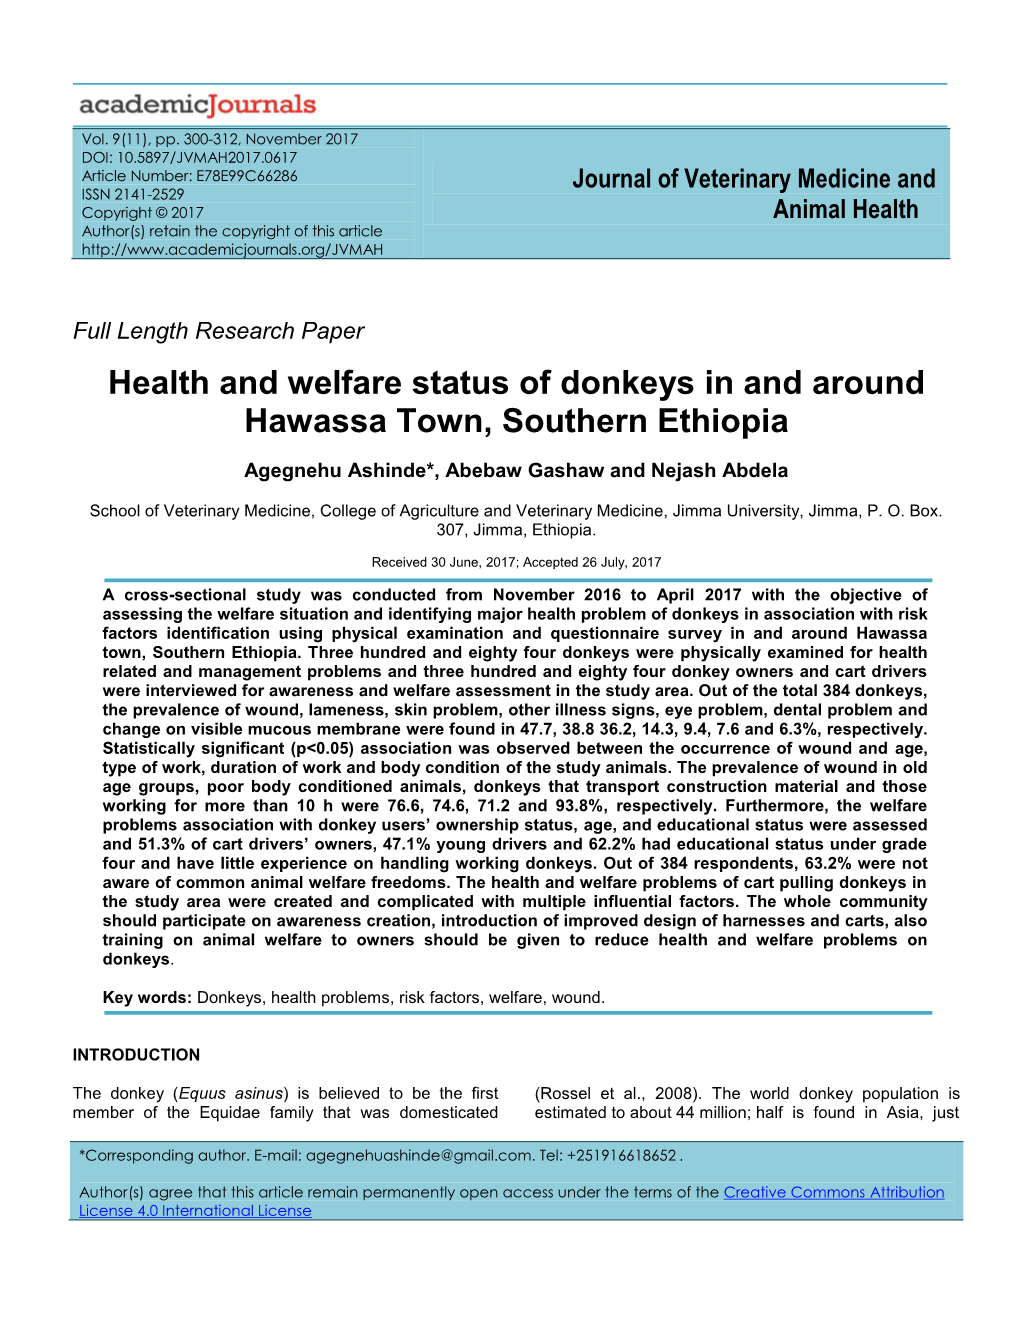 Health and Welfare Status of Donkeys in and Around Hawassa Town, Southern Ethiopia